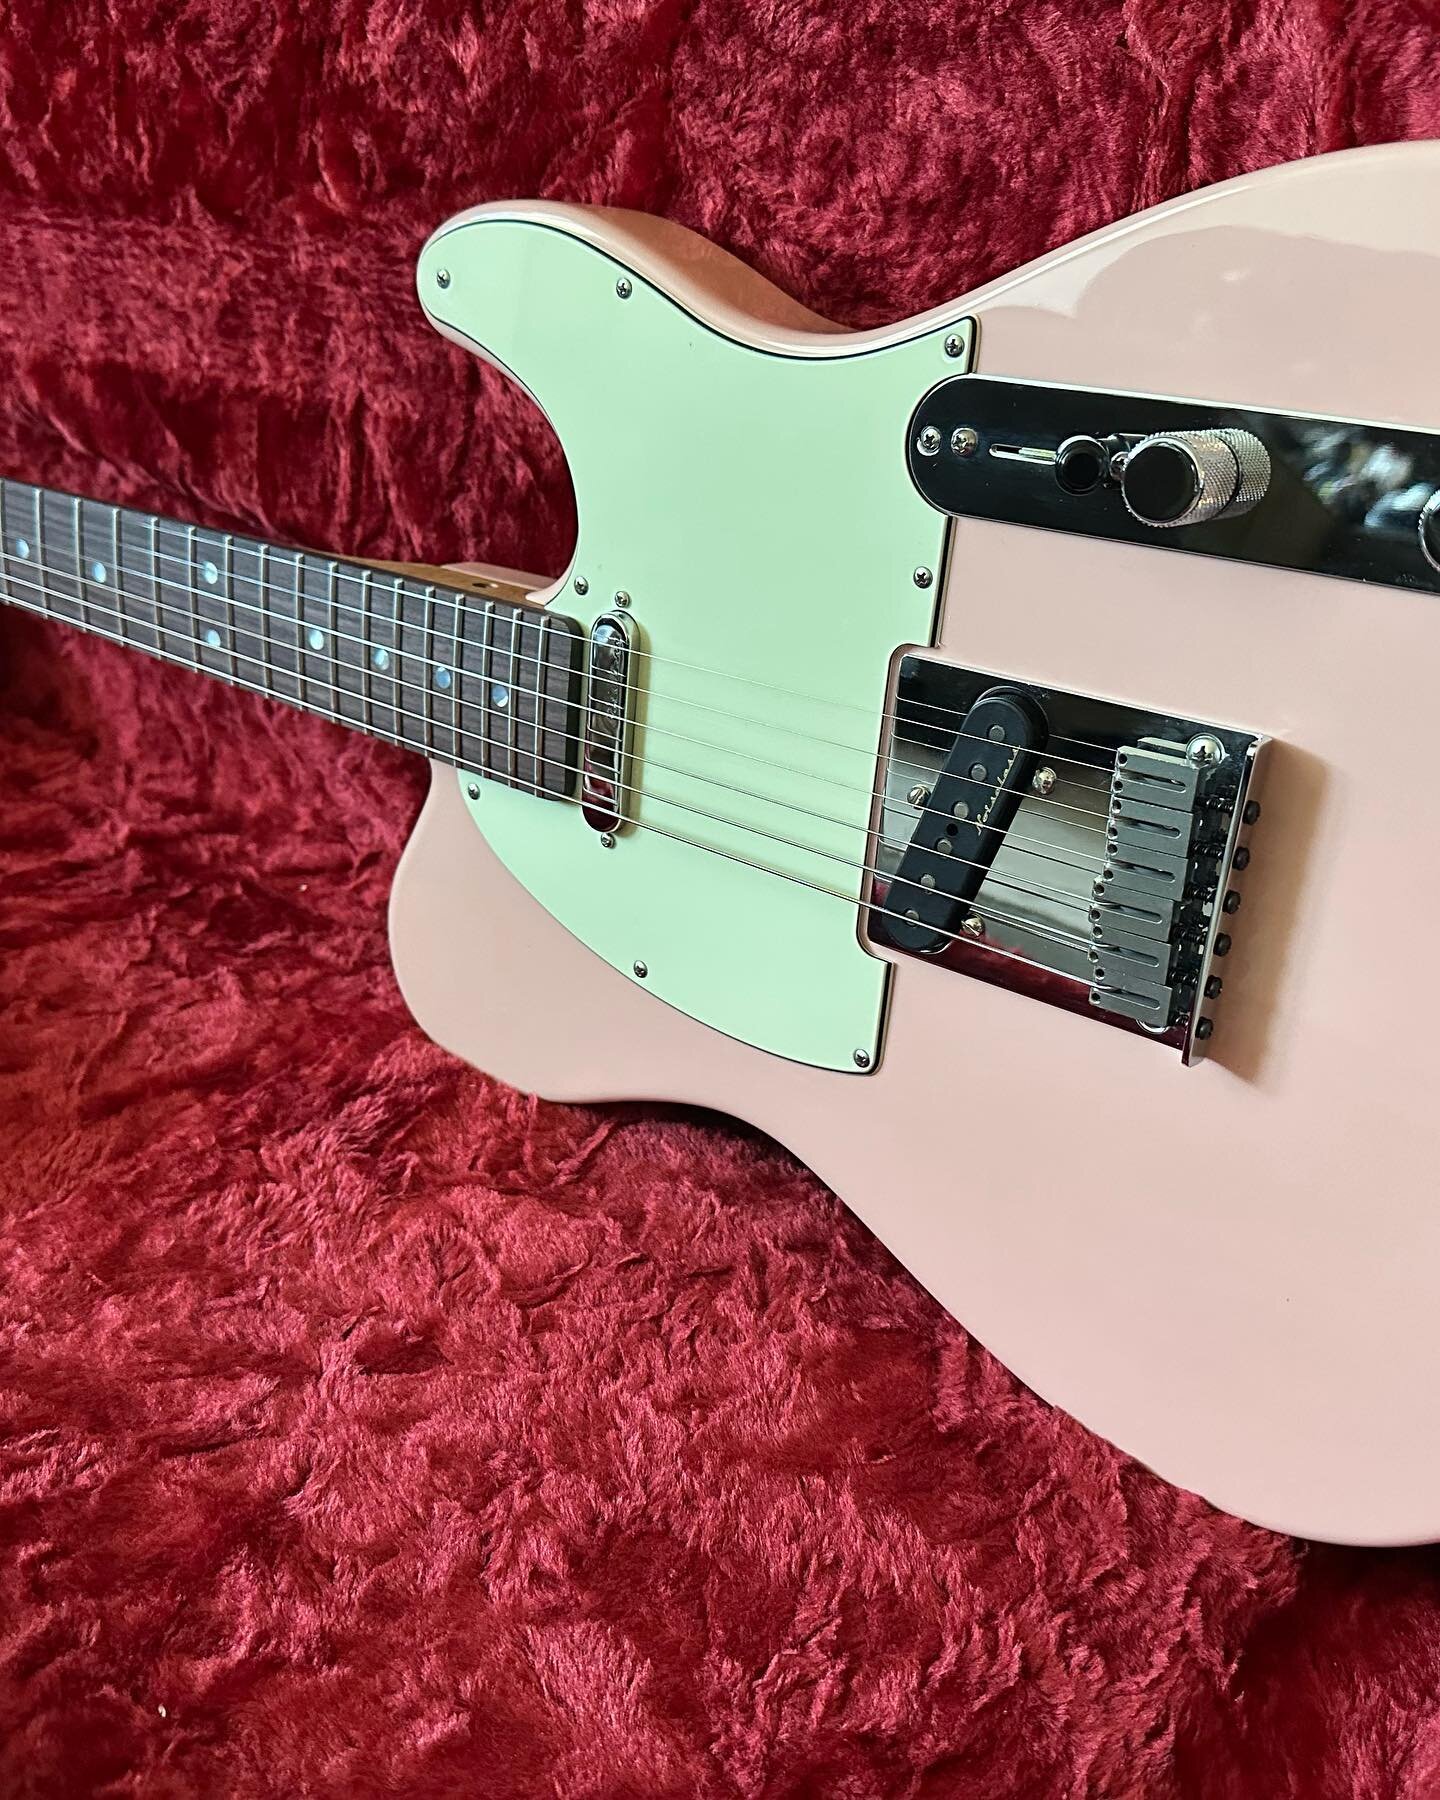 In October 2020 my brother and I started building this telecaster from scratch. It&rsquo;s finally finished!